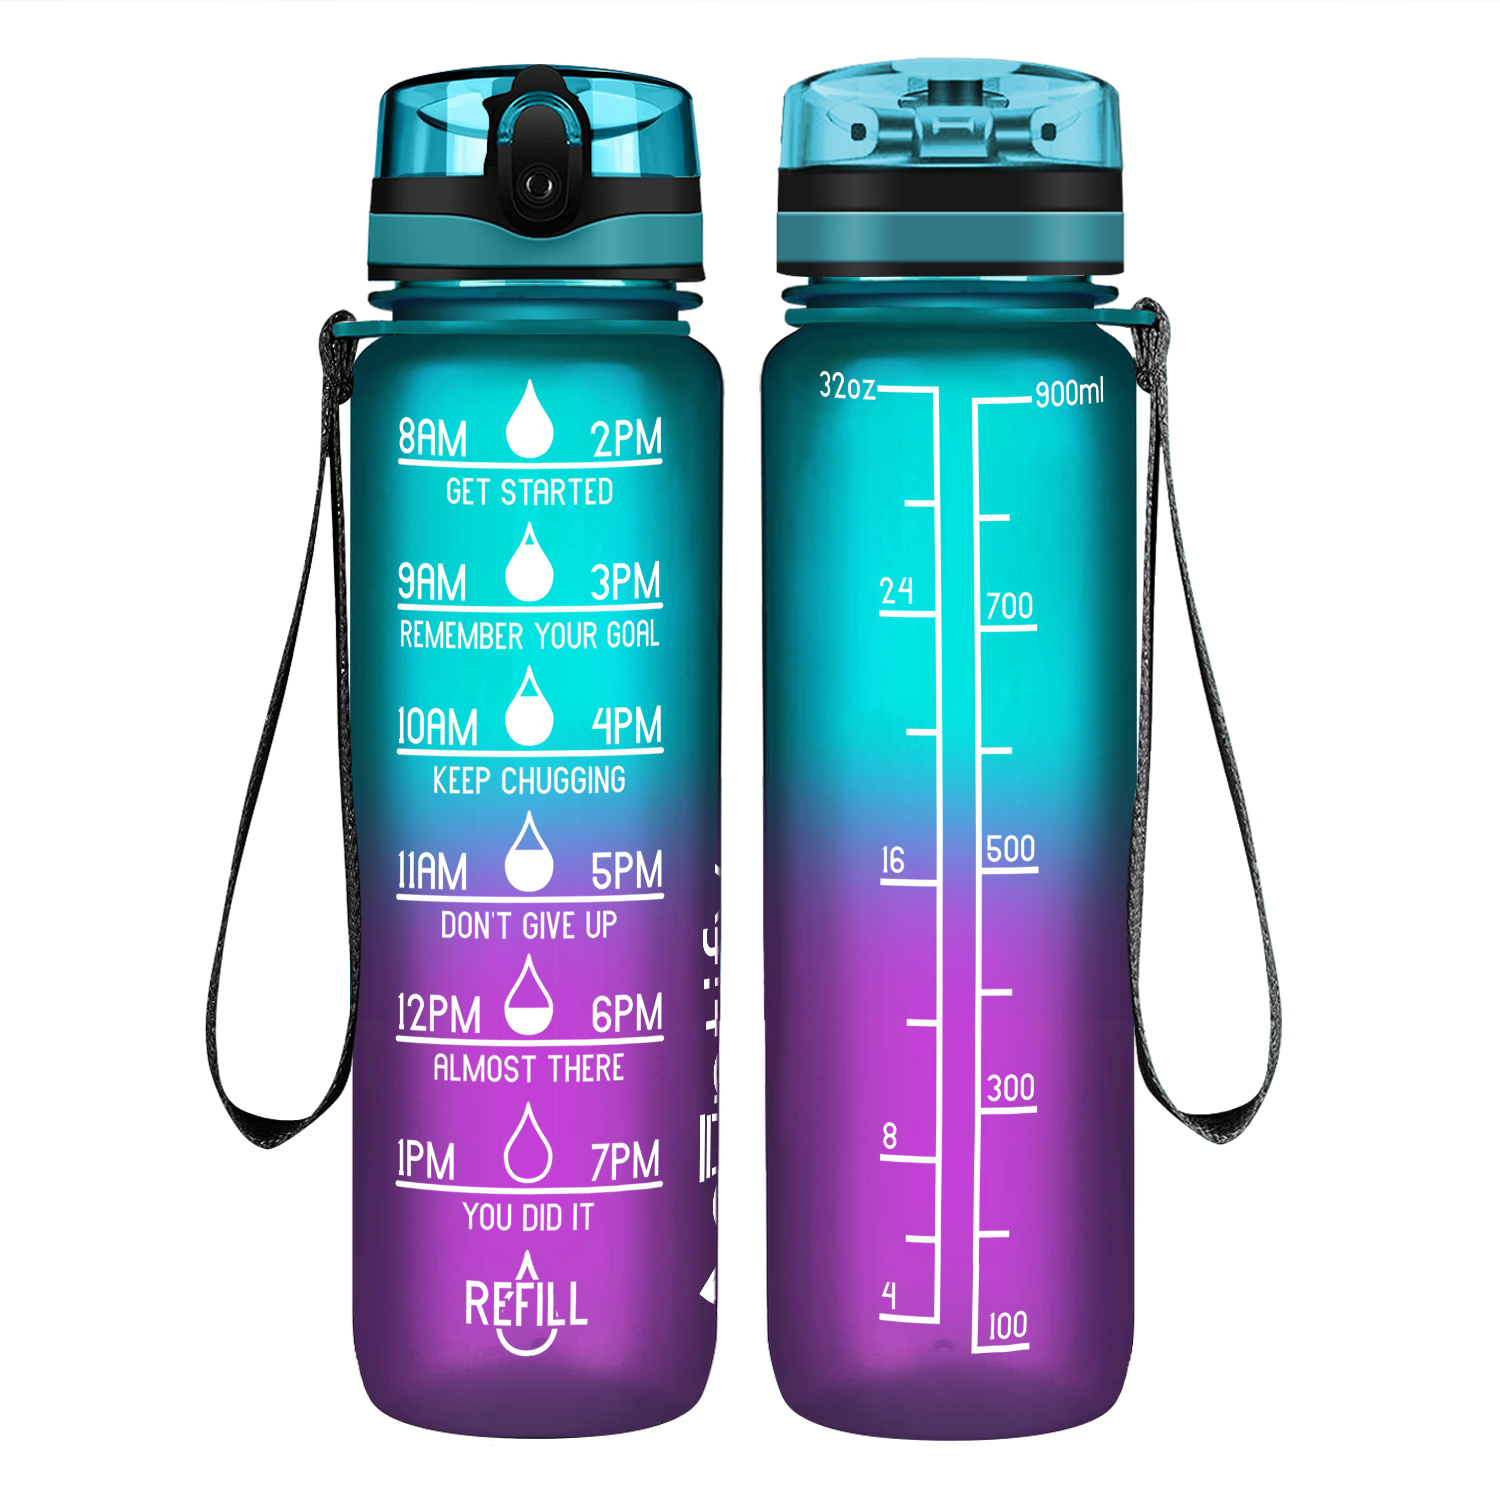 Cuptify Mermaid Frosted Motivational Water Bottle